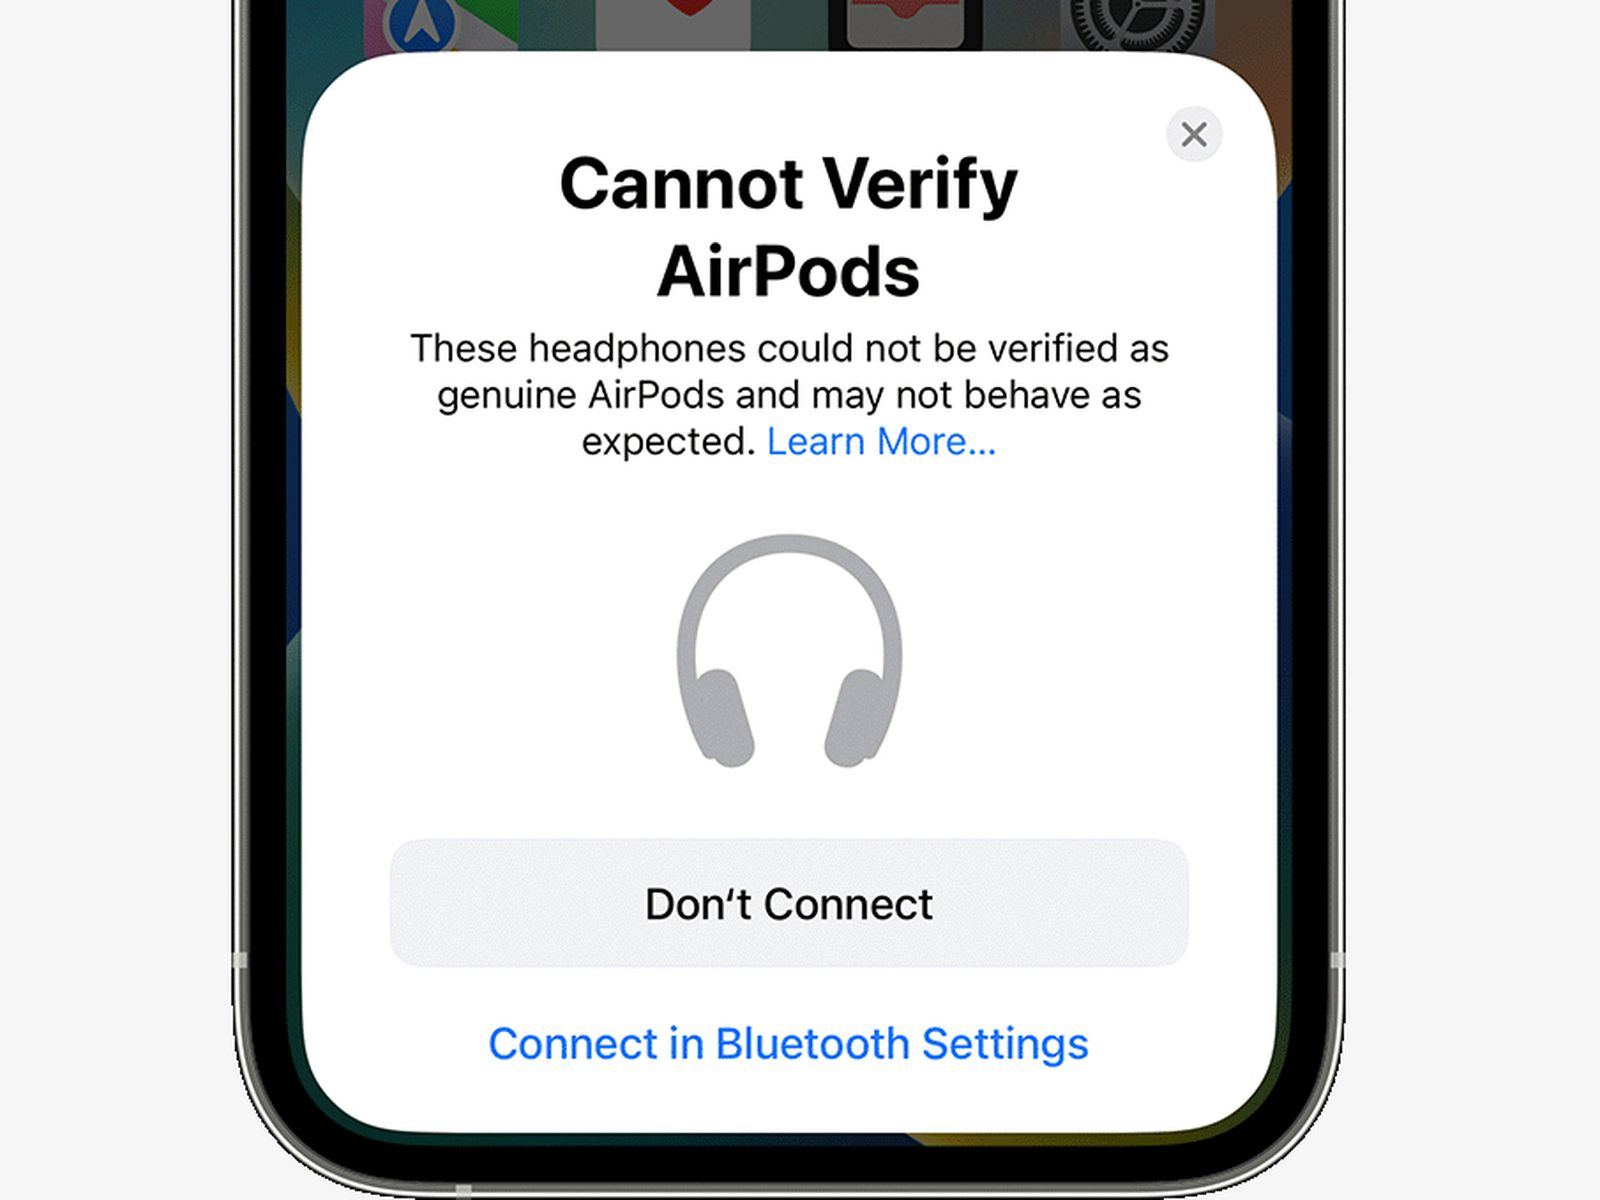 Is it safe to connect fake AirPods?